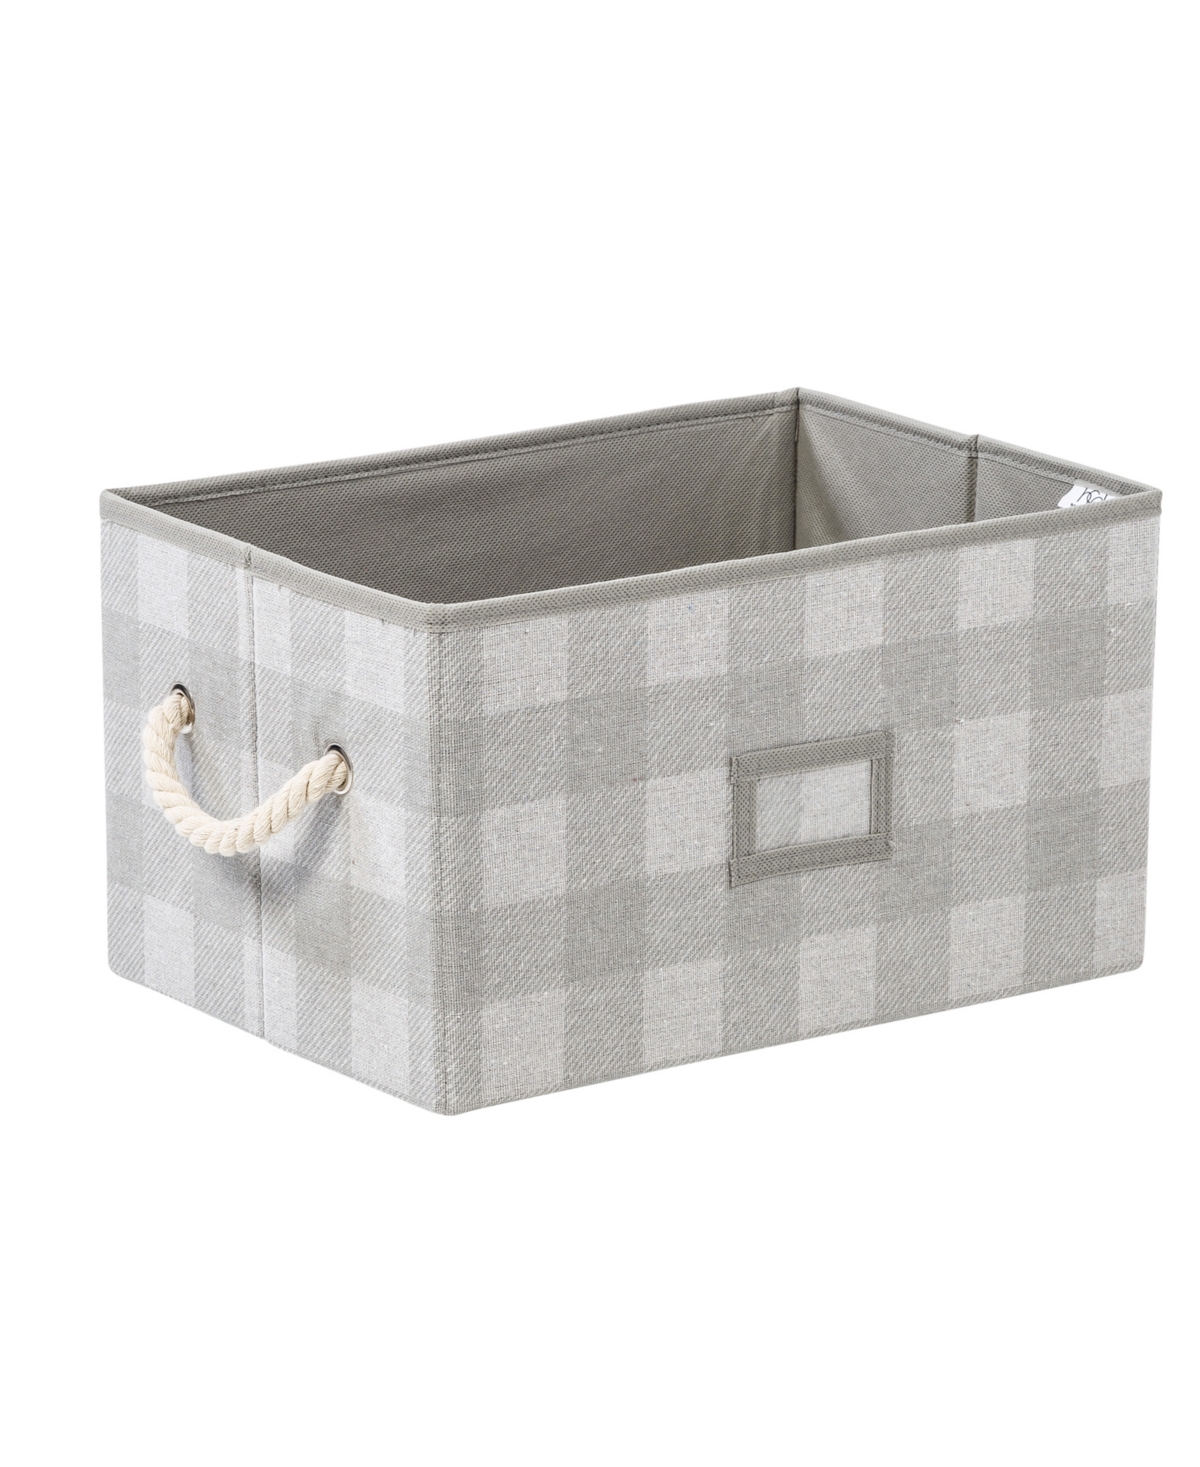 Shop Honey Can Do Set Of 3 Collapsible Large Fabric Storage Bins With Handles, Plaid In Multi